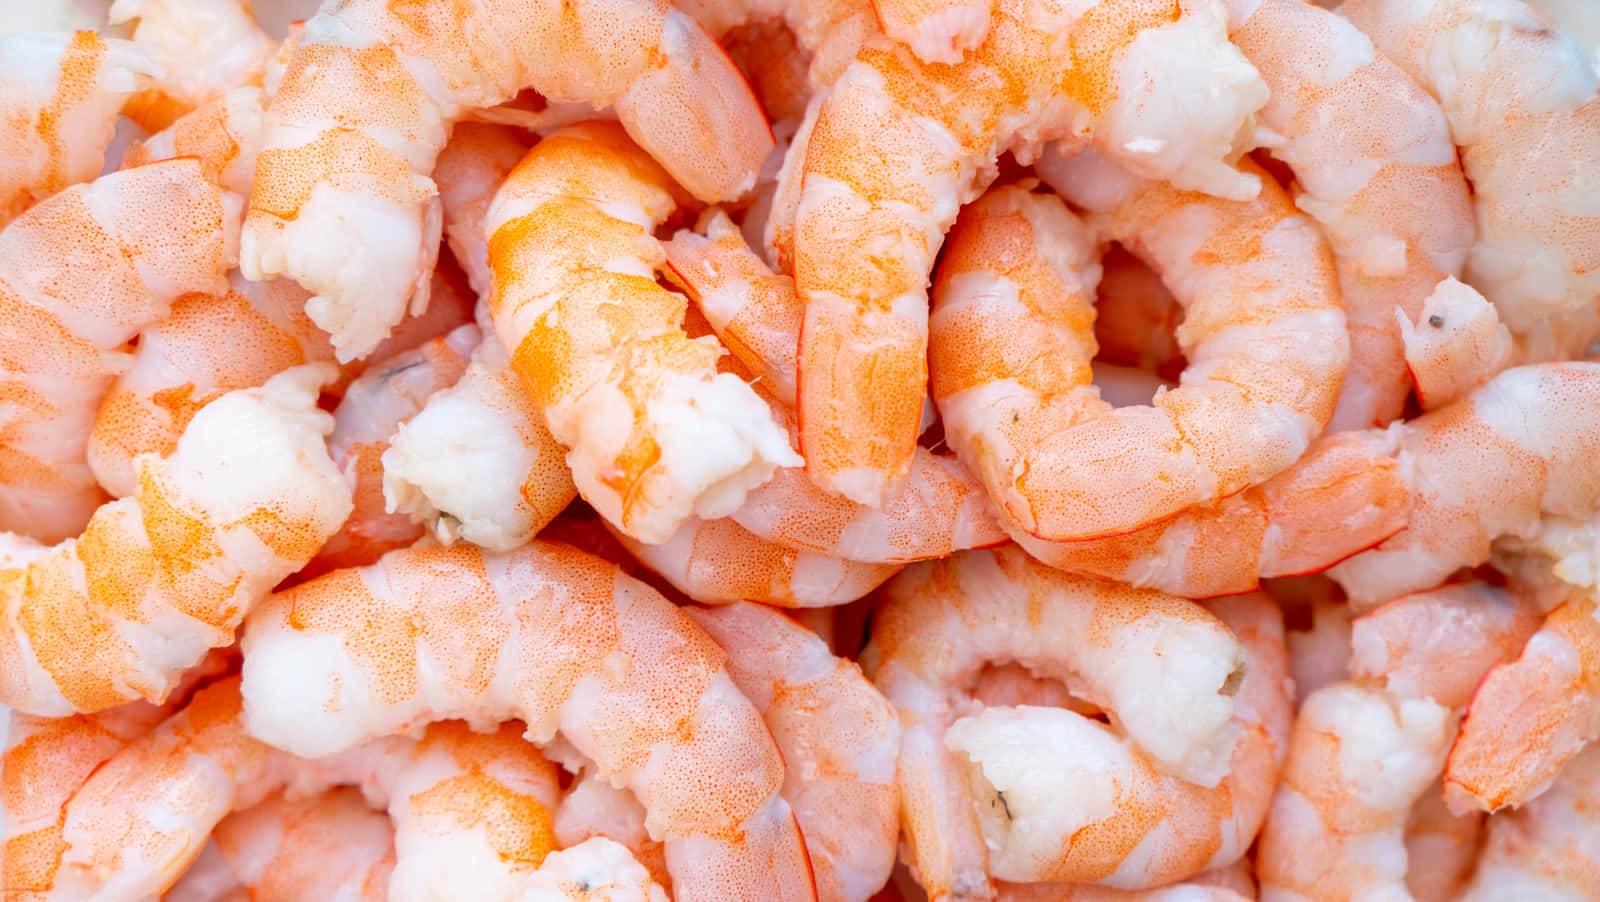 Shrimp In A Bowl Close-up Picture